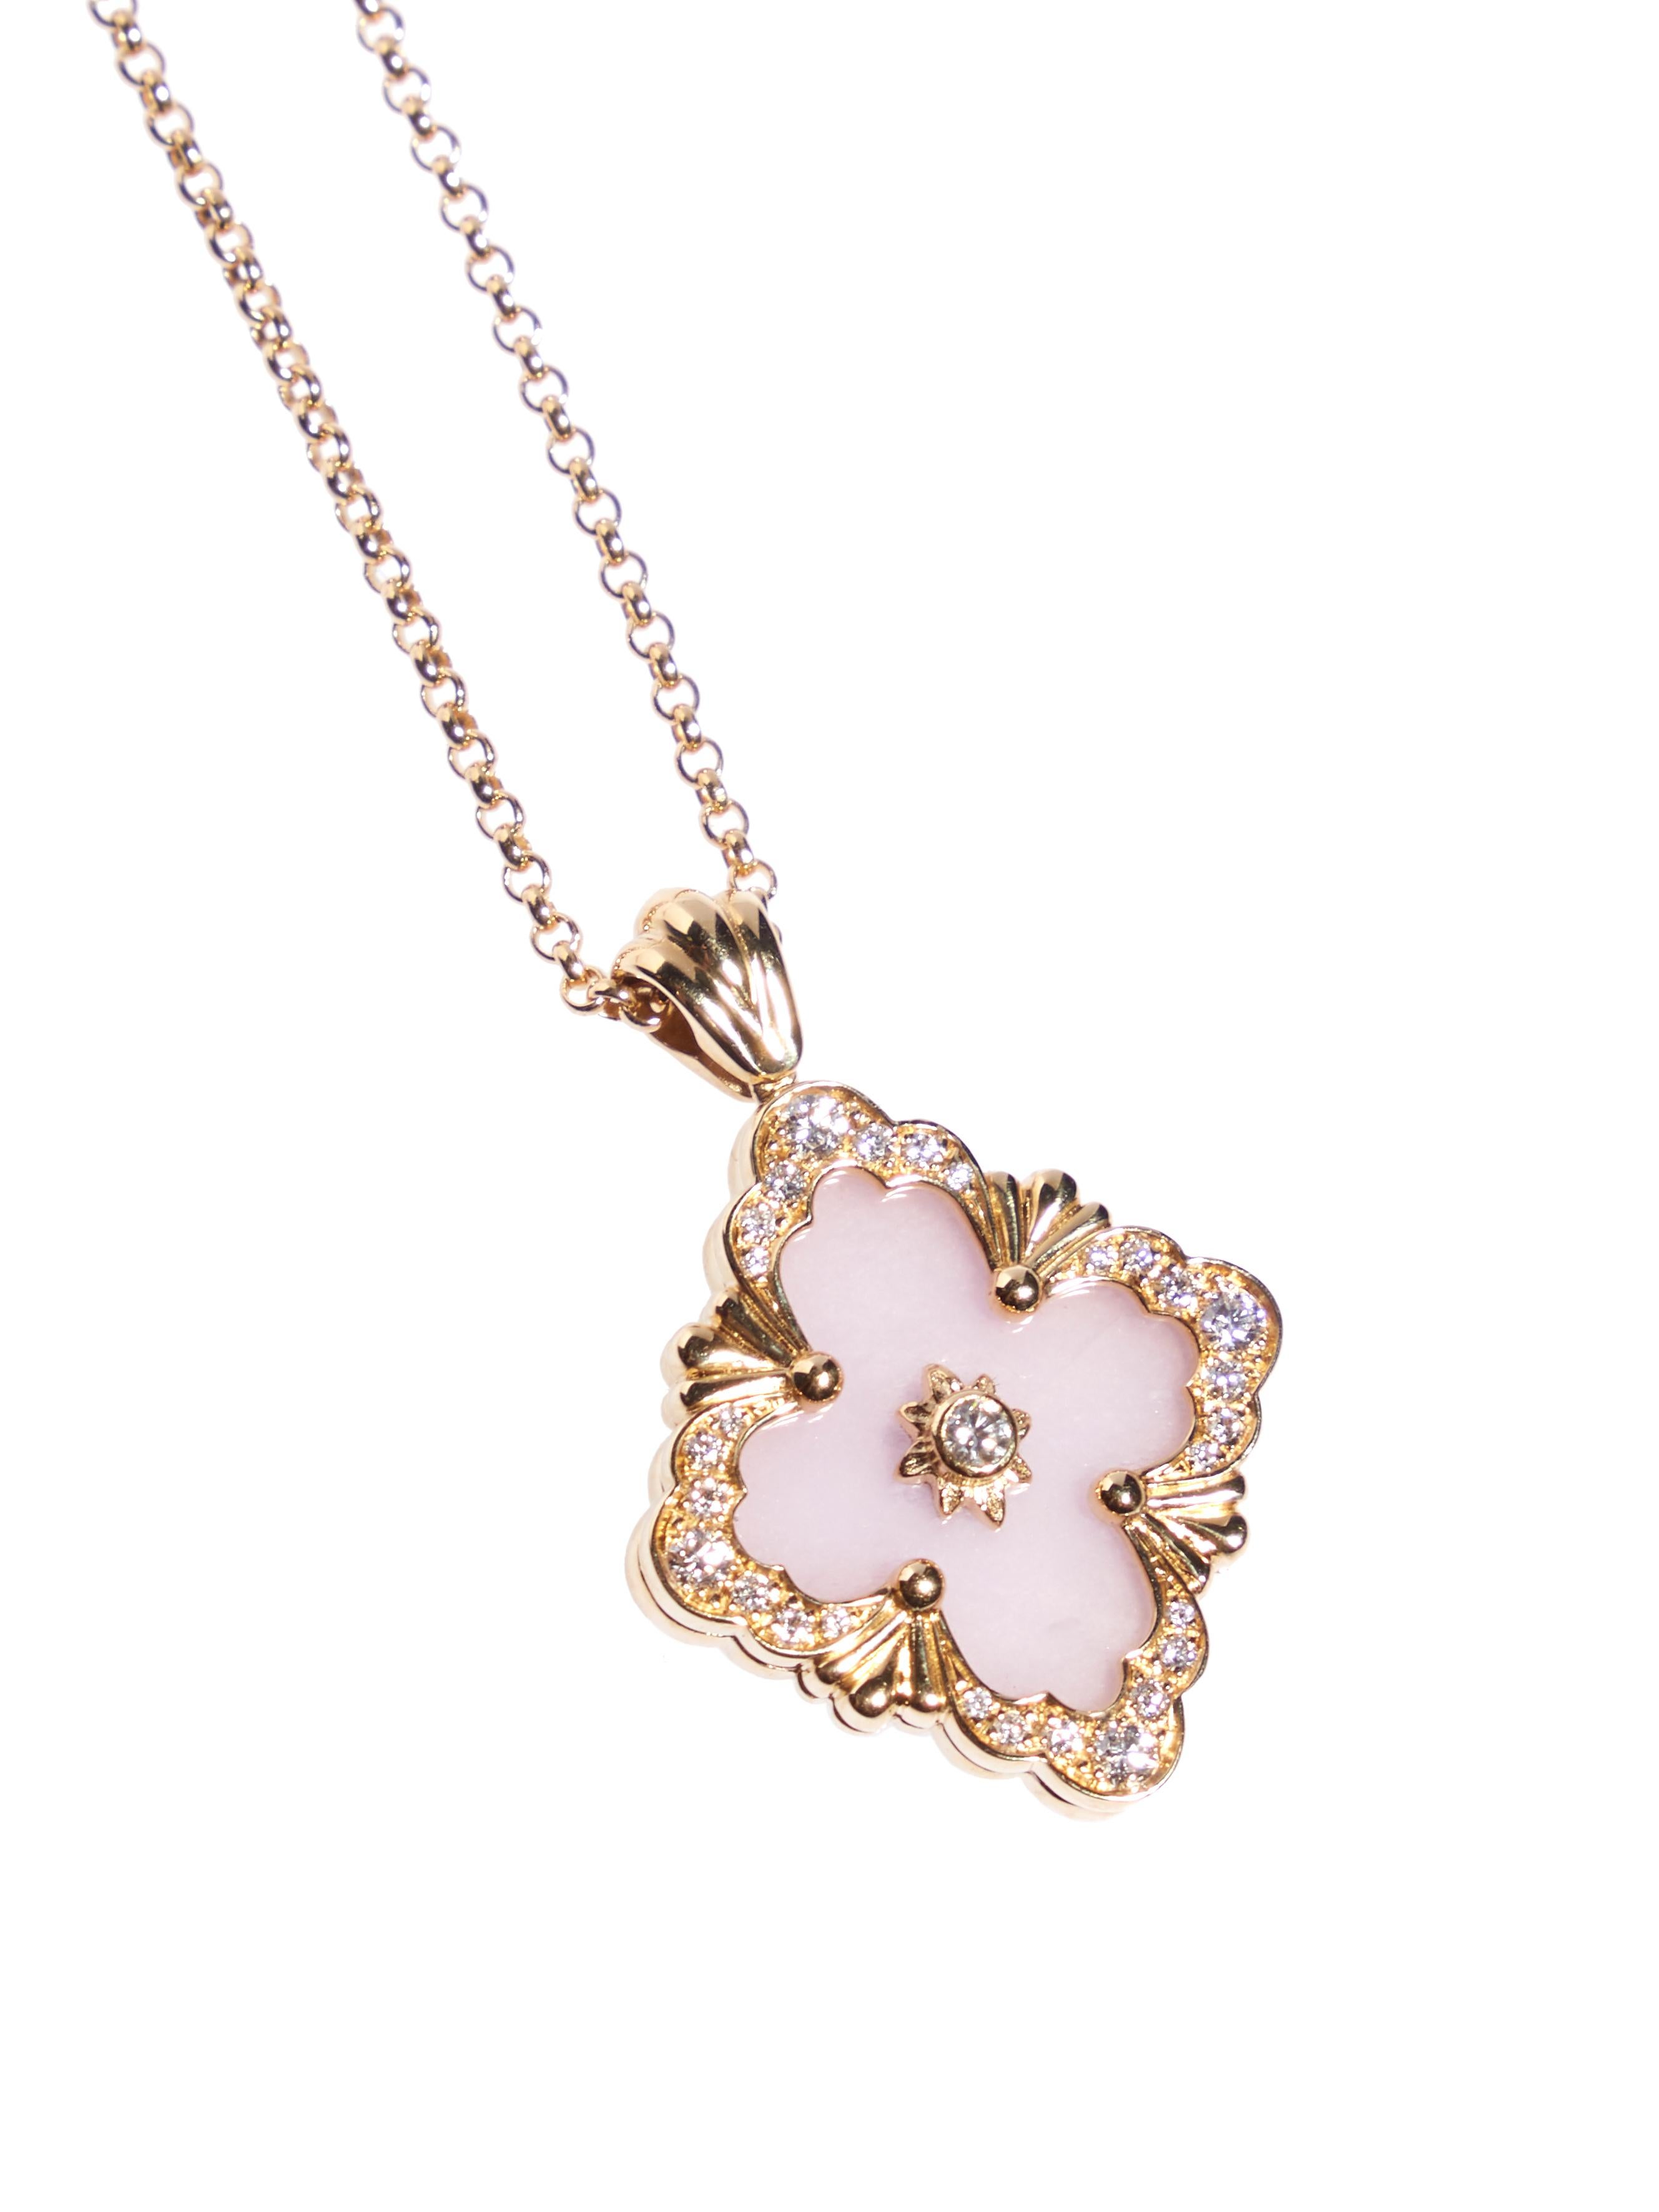 Signed Opera Color pendant limited edition necklace by Buccellati made in 18 karat pink gold with lavender jade. White diamonds at center and border. Total carat weight is 0.30 ct

Inspired by luxurious vintage style, this beautiful Buccellati Opera